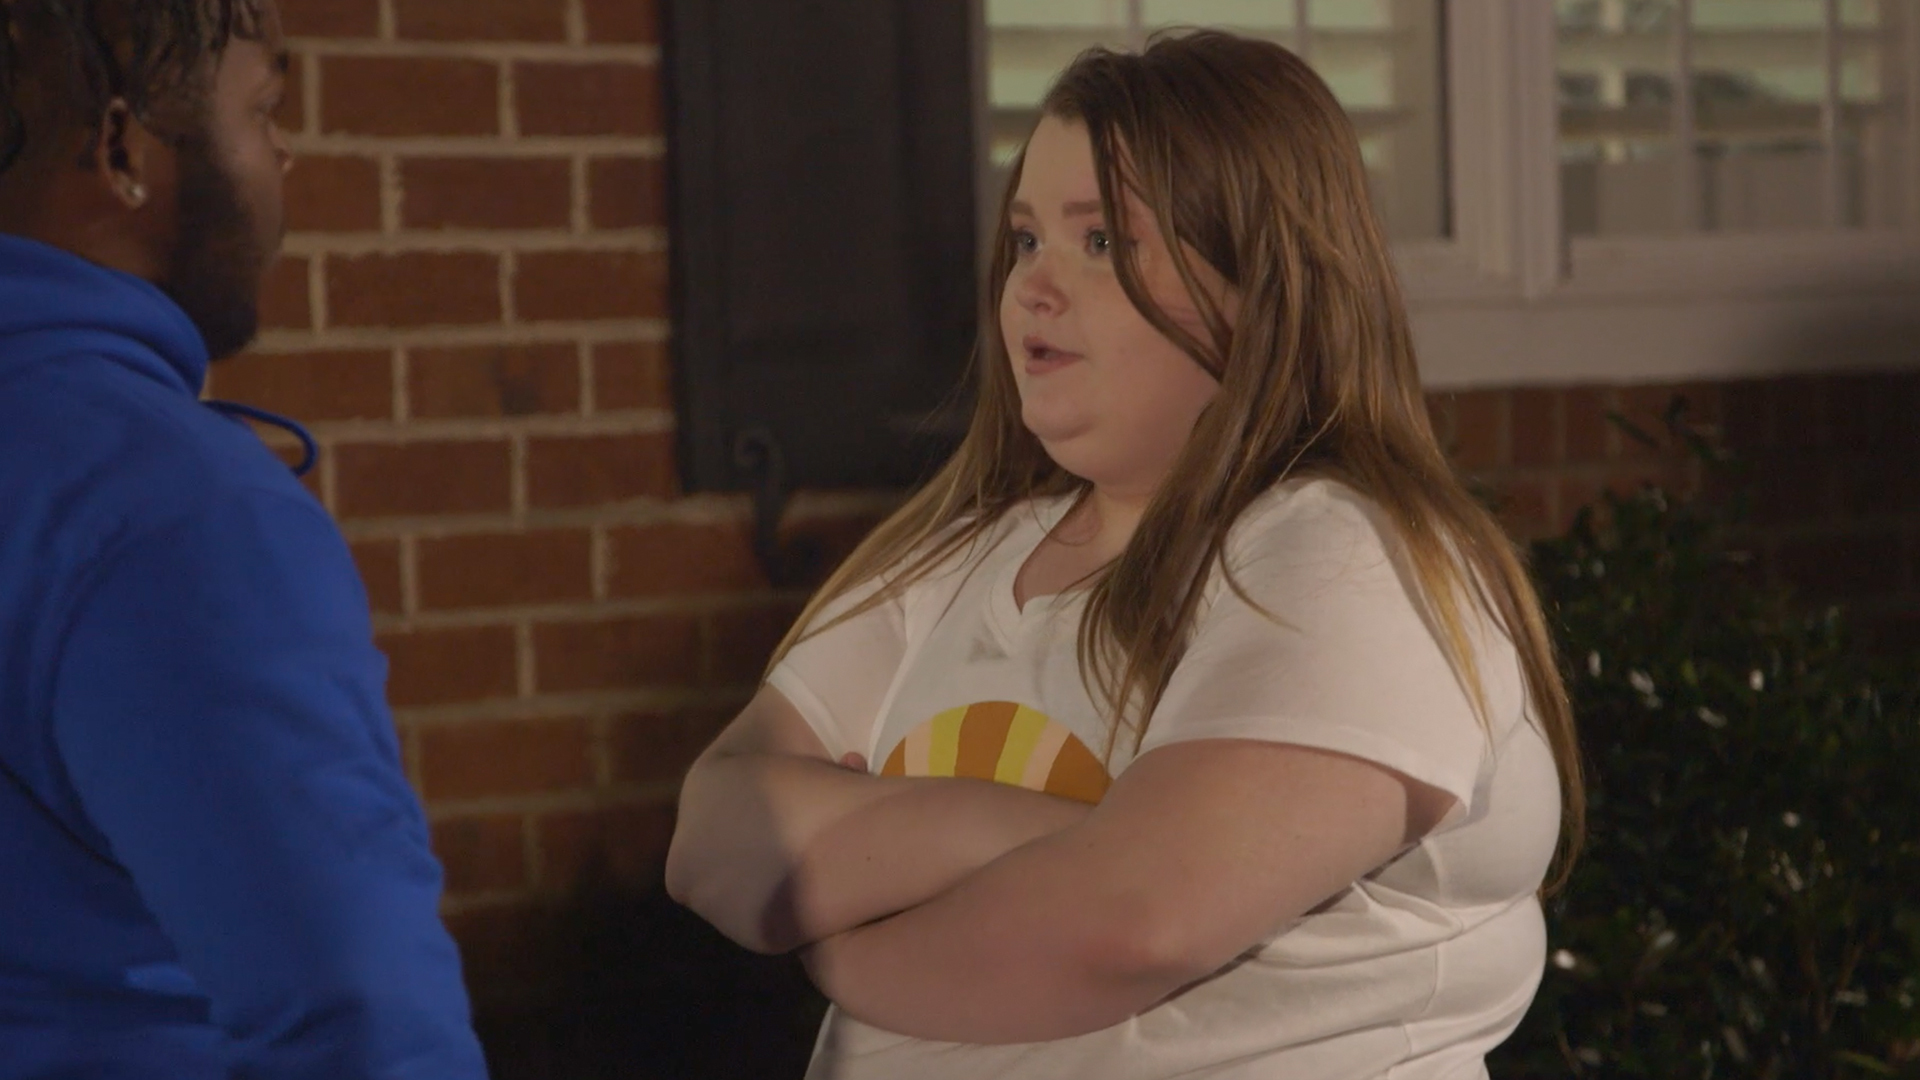 Watch Alana & Dralin Go On Their First Date! | Mama June: From Not to Hot Video Extras